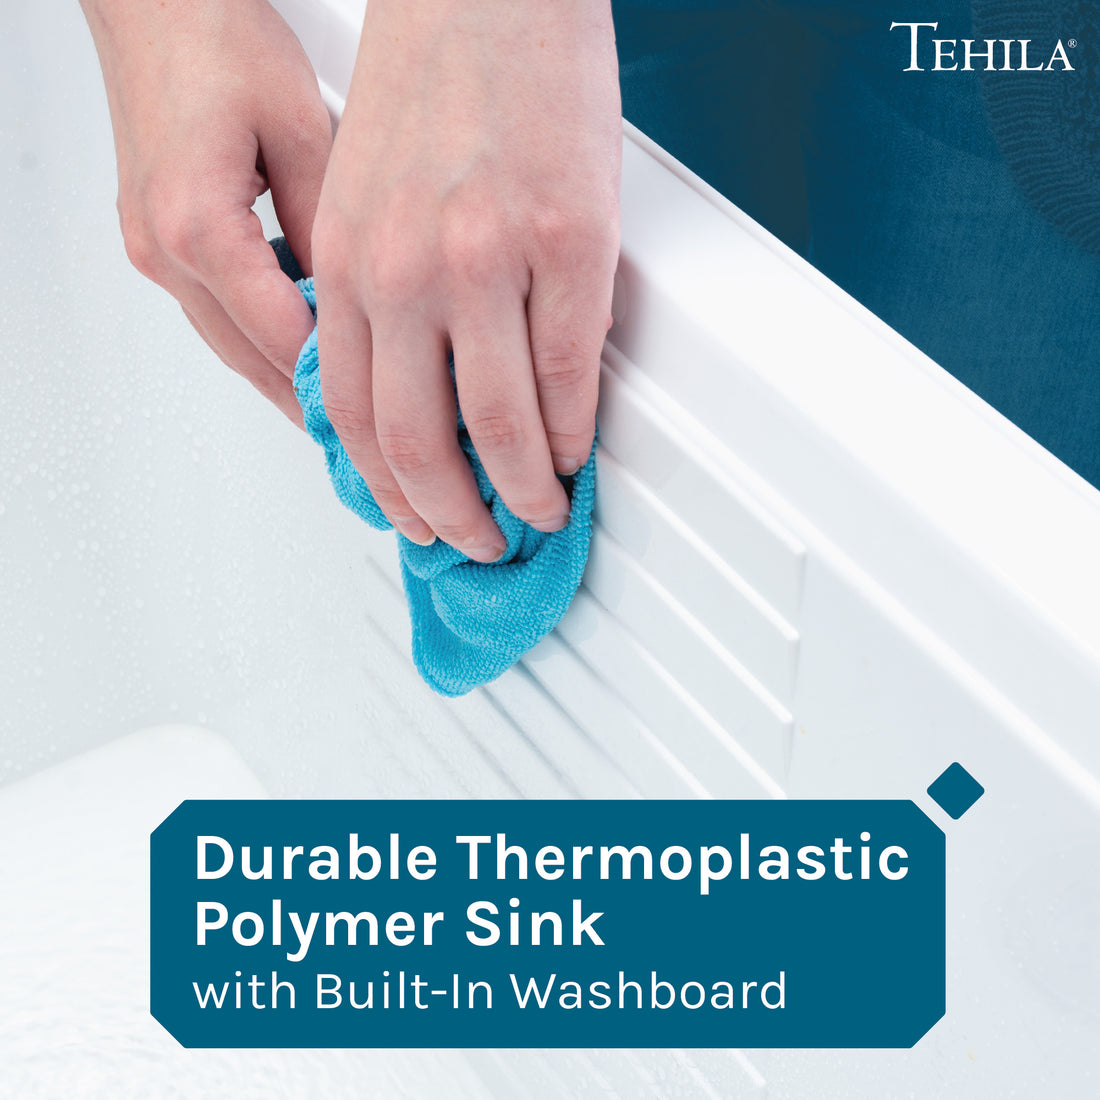 Durable Thermoplastic Polymer Sink with Built-in Washboard